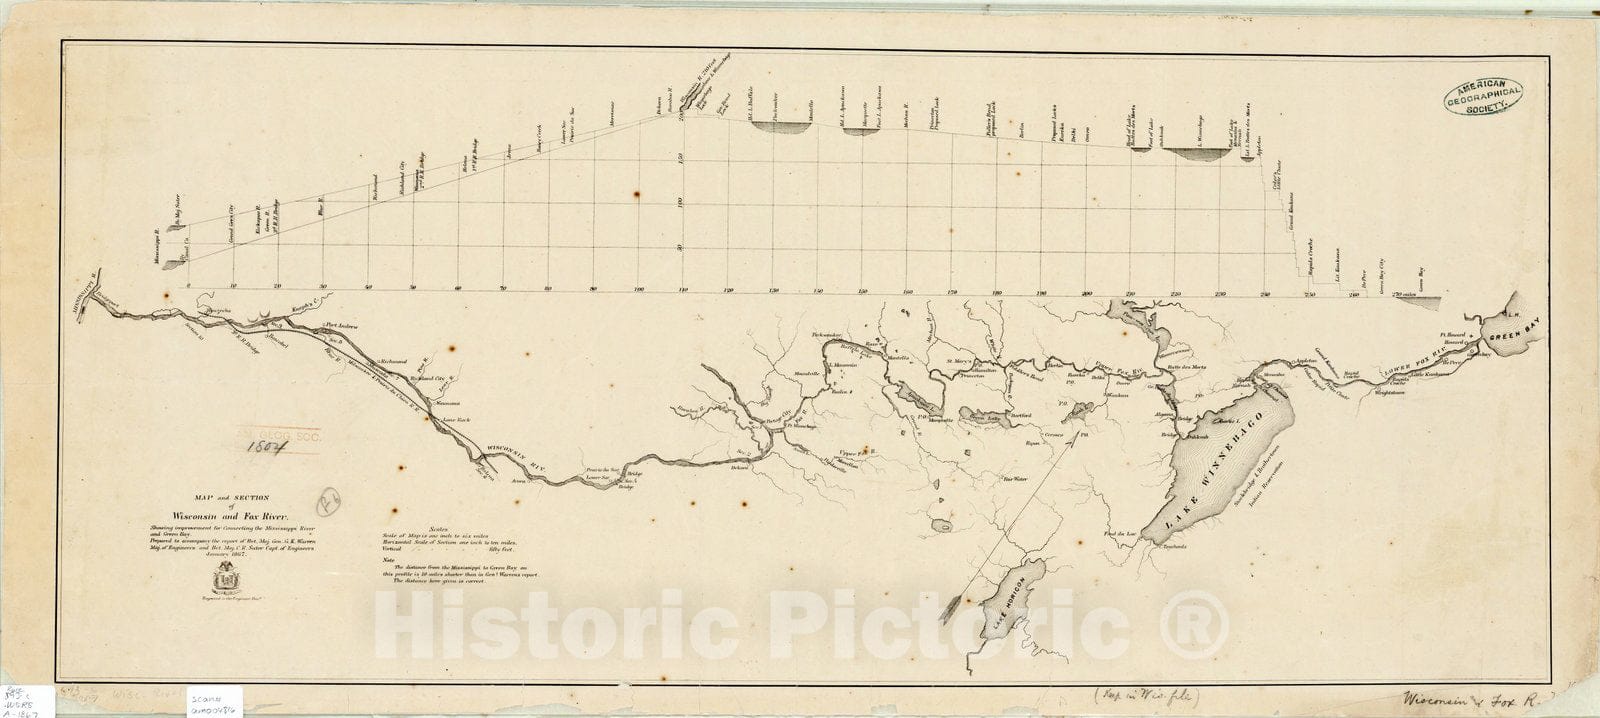 Historic Map : Wisconsin River 1867, Map of section of Wisconsin and Fox River showing improvement for connecting the Mississippi River and Green Bay , Antique Vintage Reproduction